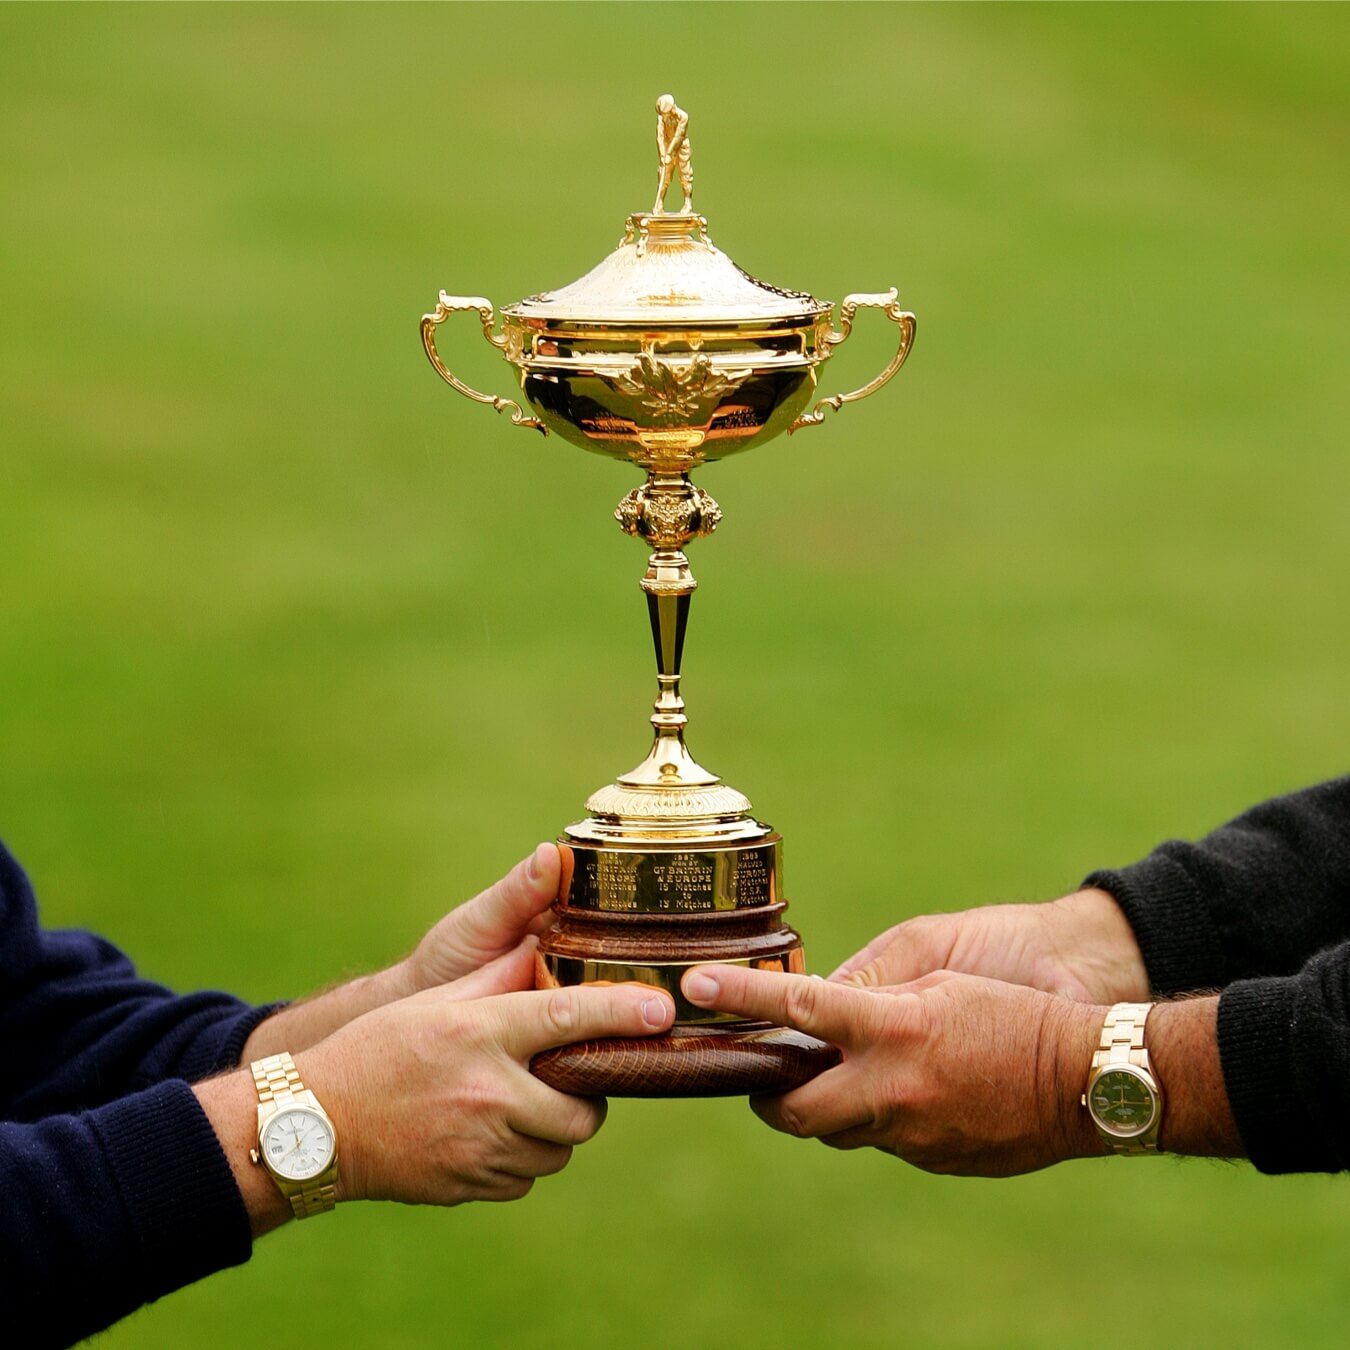 Rolex and golf - A foundation of shared values